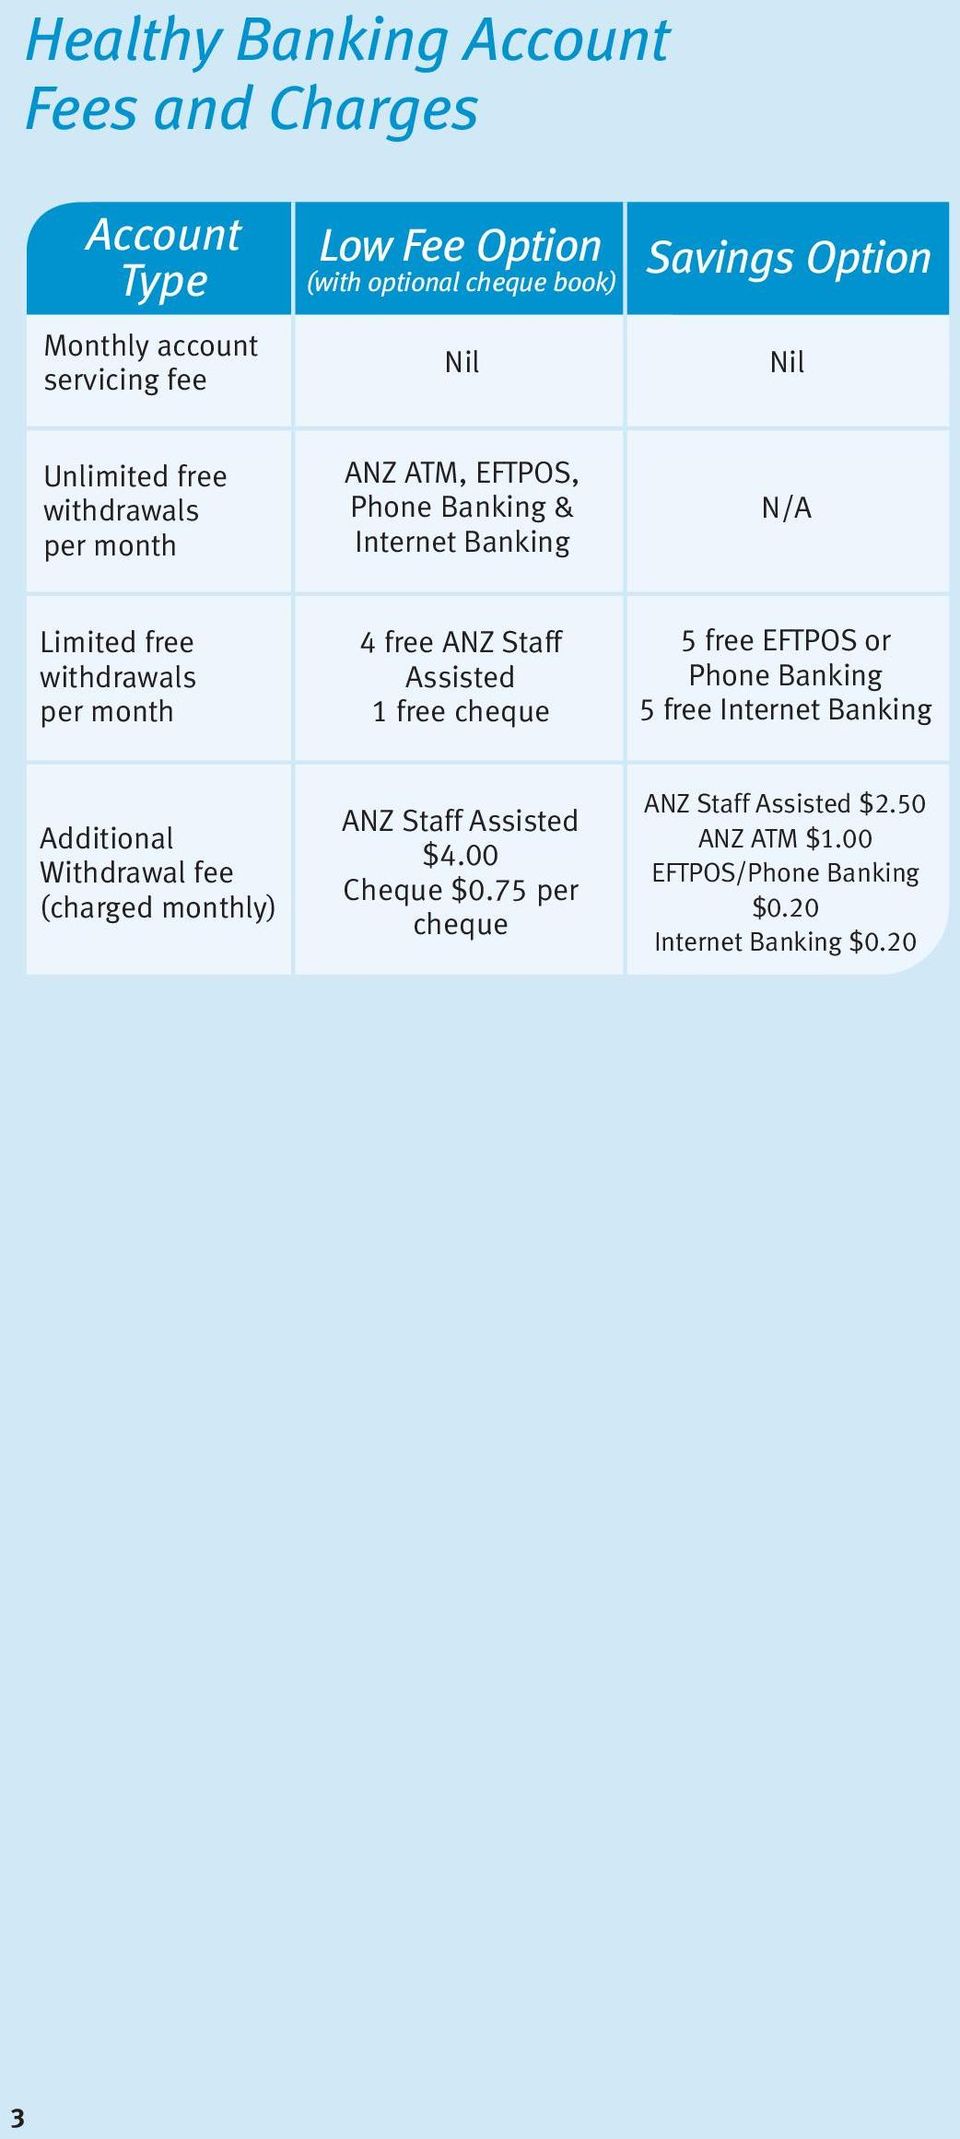 free ANZ Staff Assisted 1 free cheque 5 free EFTPOS or Phone Banking 5 free Internet Banking Additional Withdrawal fee (charged monthly)